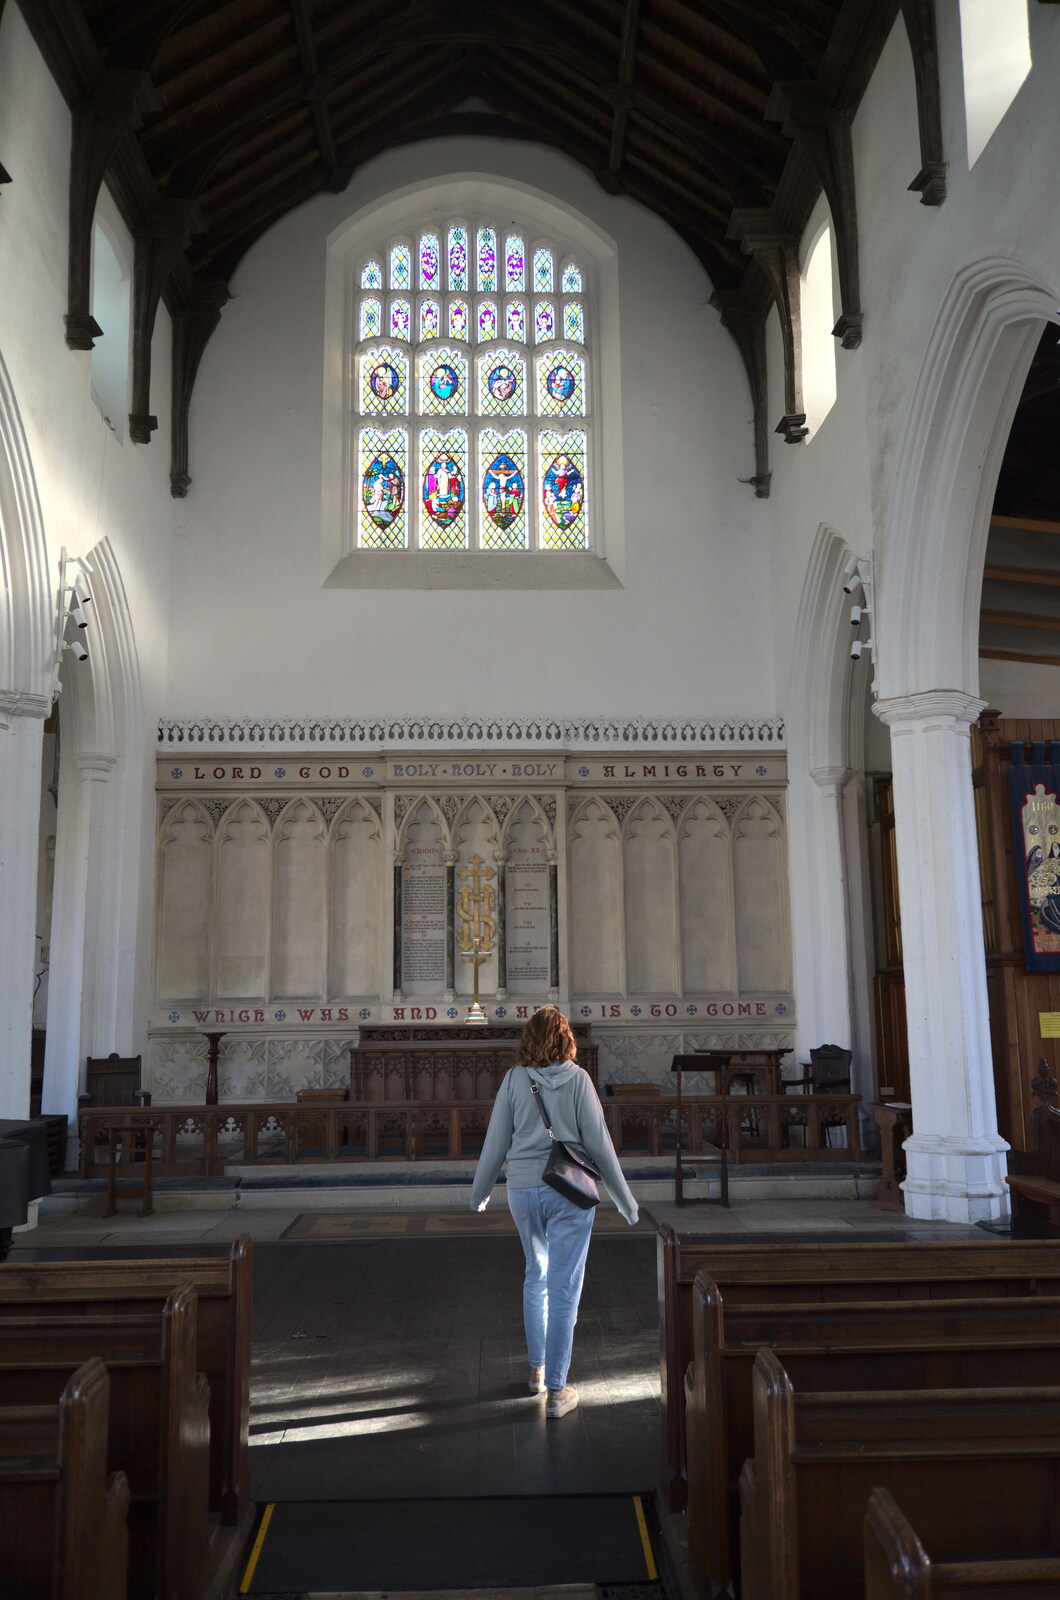 A Postcard from Bungay, Suffolk - 2nd November 2022: Isobel looks around in St. Mary's